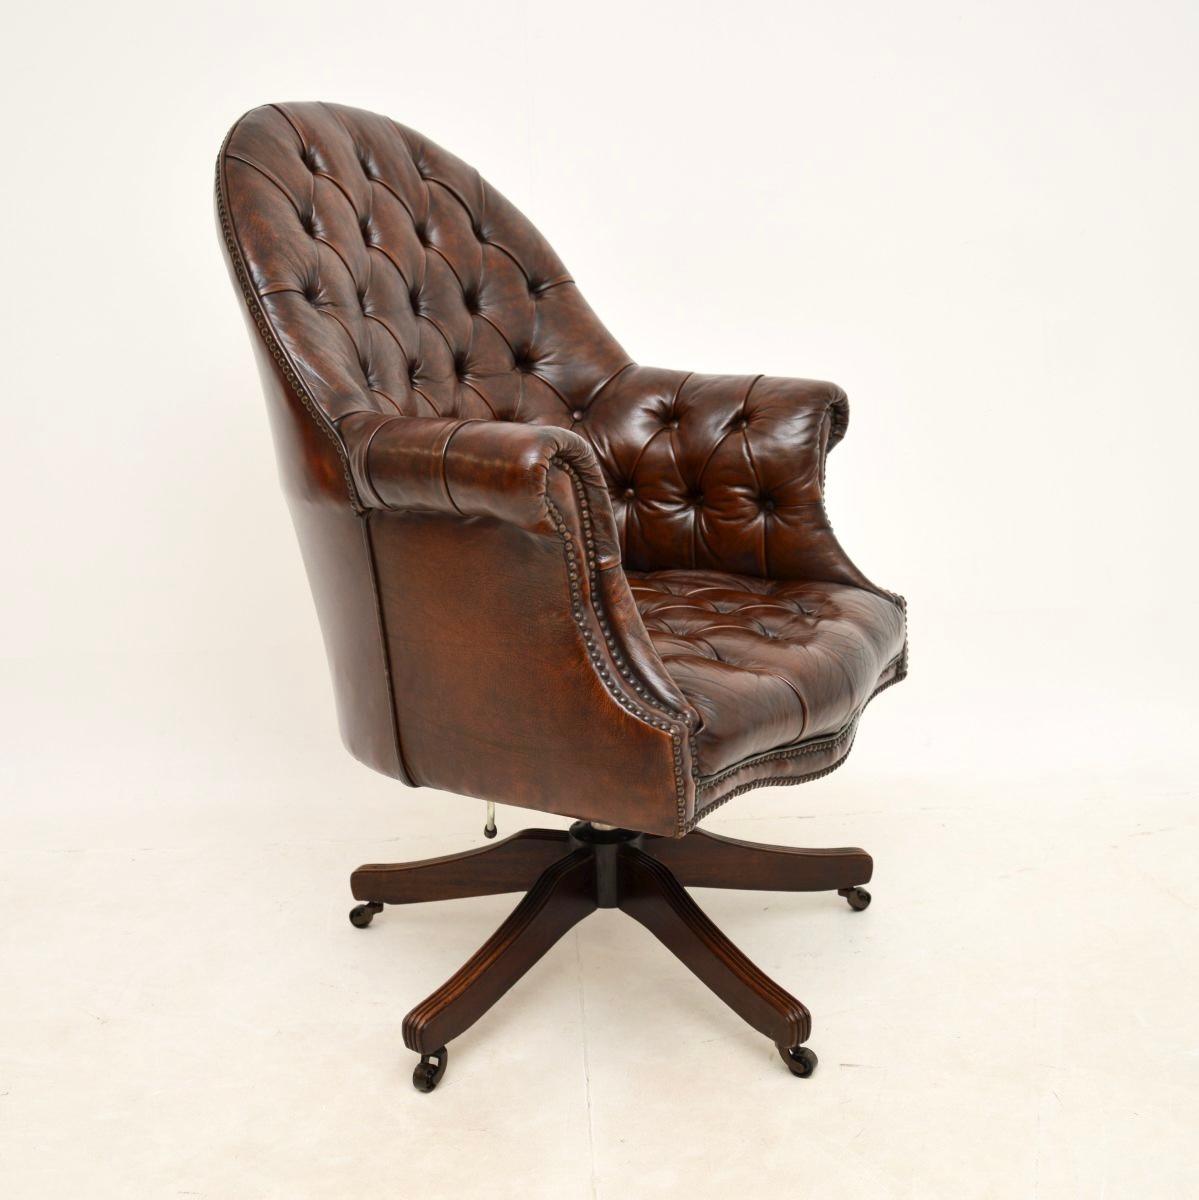 Chesterfield Antique Victorian Style Leather Swivel Desk Chair For Sale